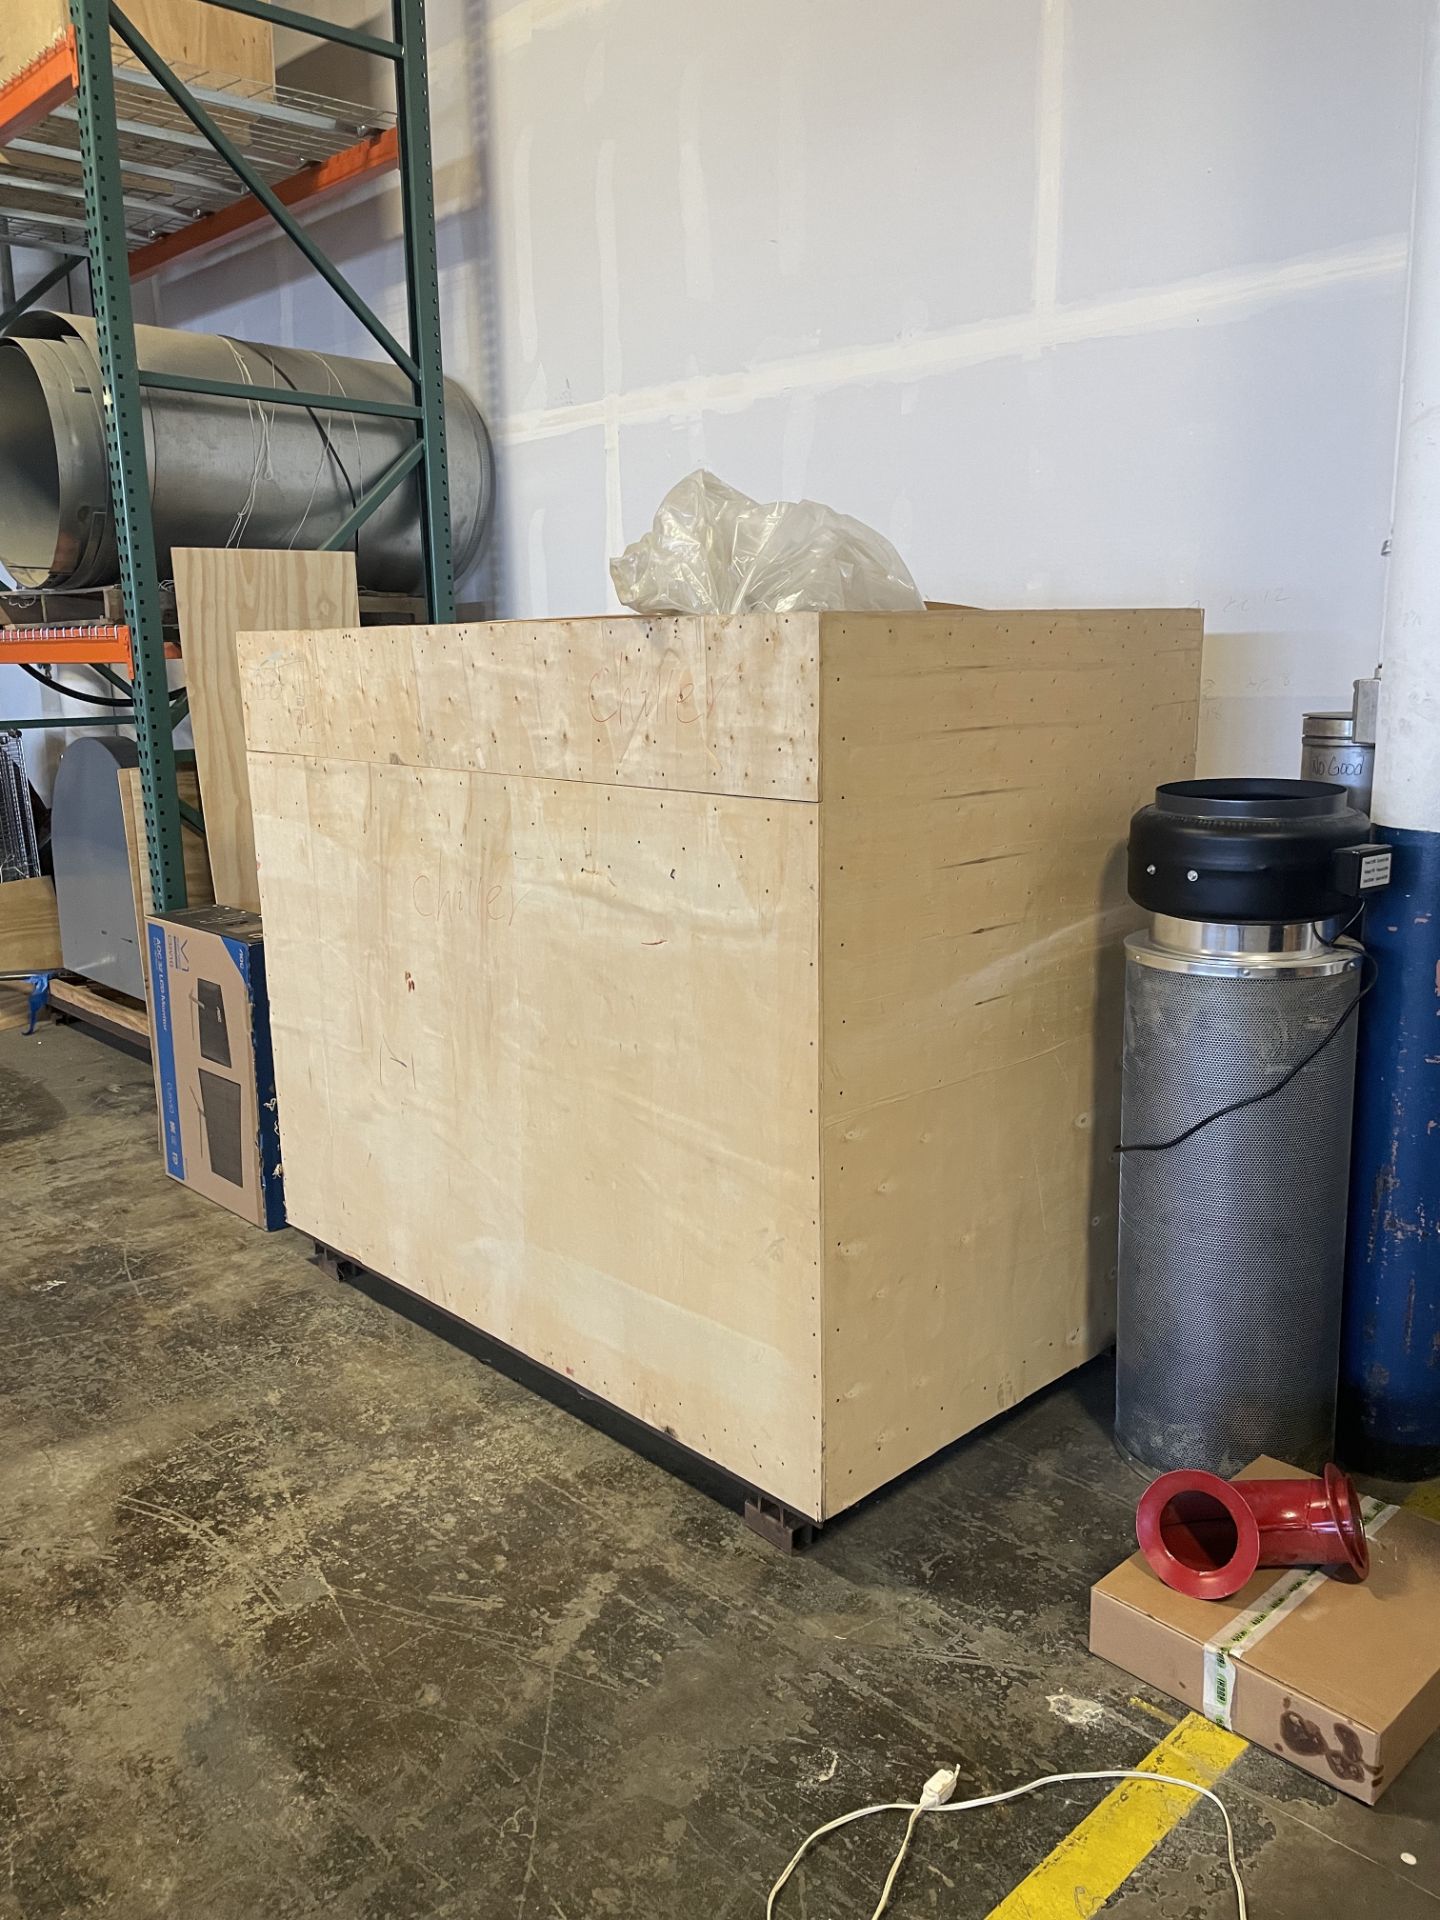 New/ Still-In-Crate Frigeast Condensing Unit for Chilling System. Model NJQFF10Z.